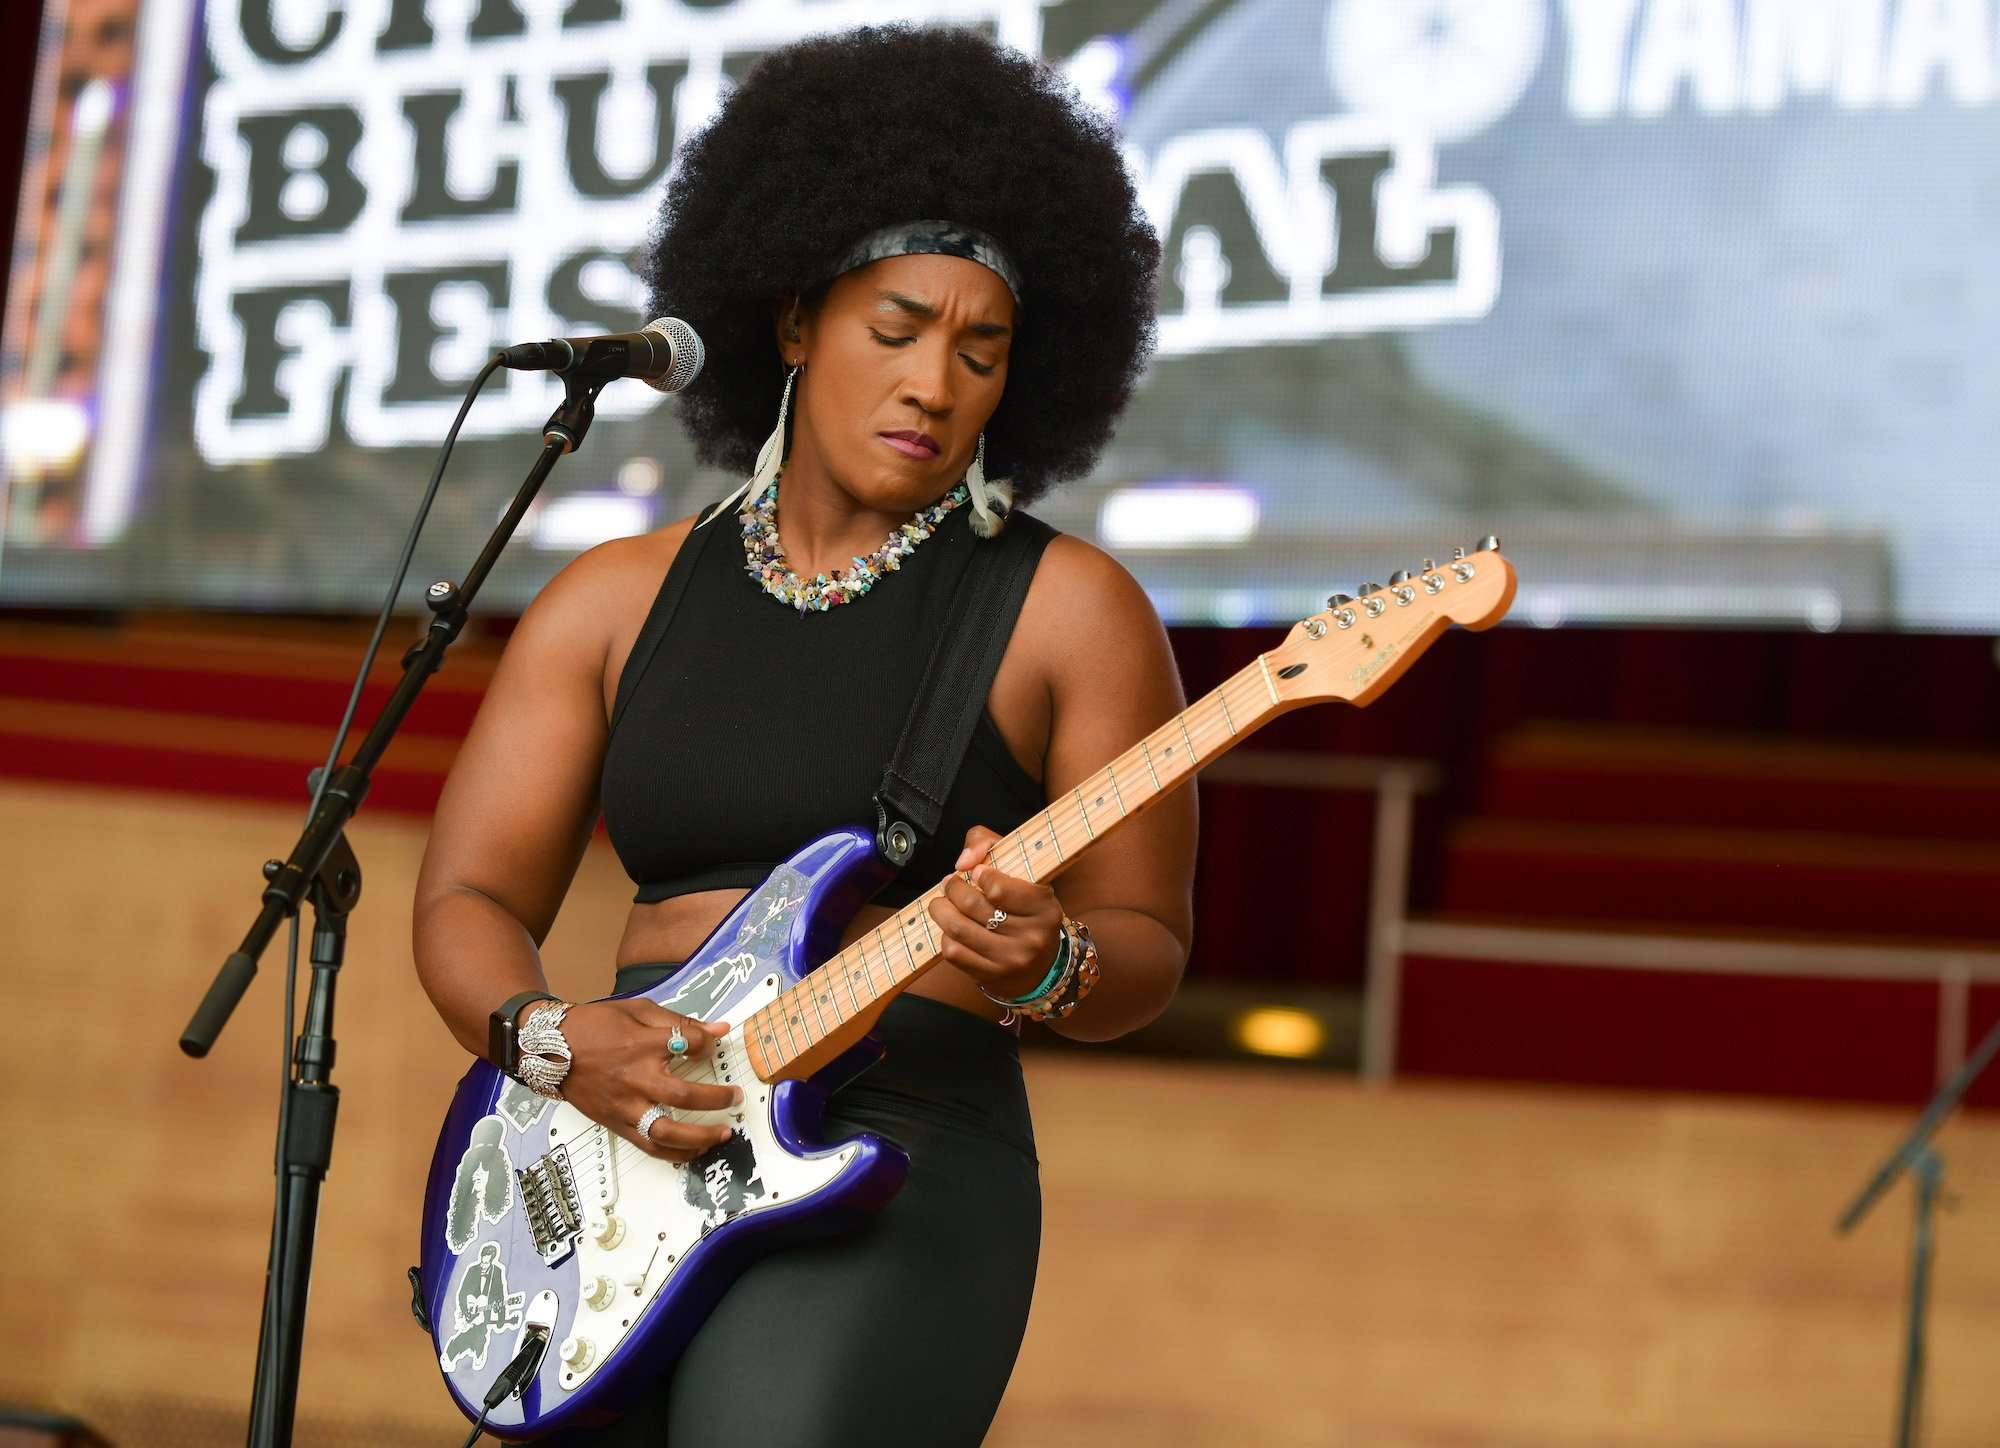 Melody Angel Live At Chicago Blues Fest [GALLERY] 1